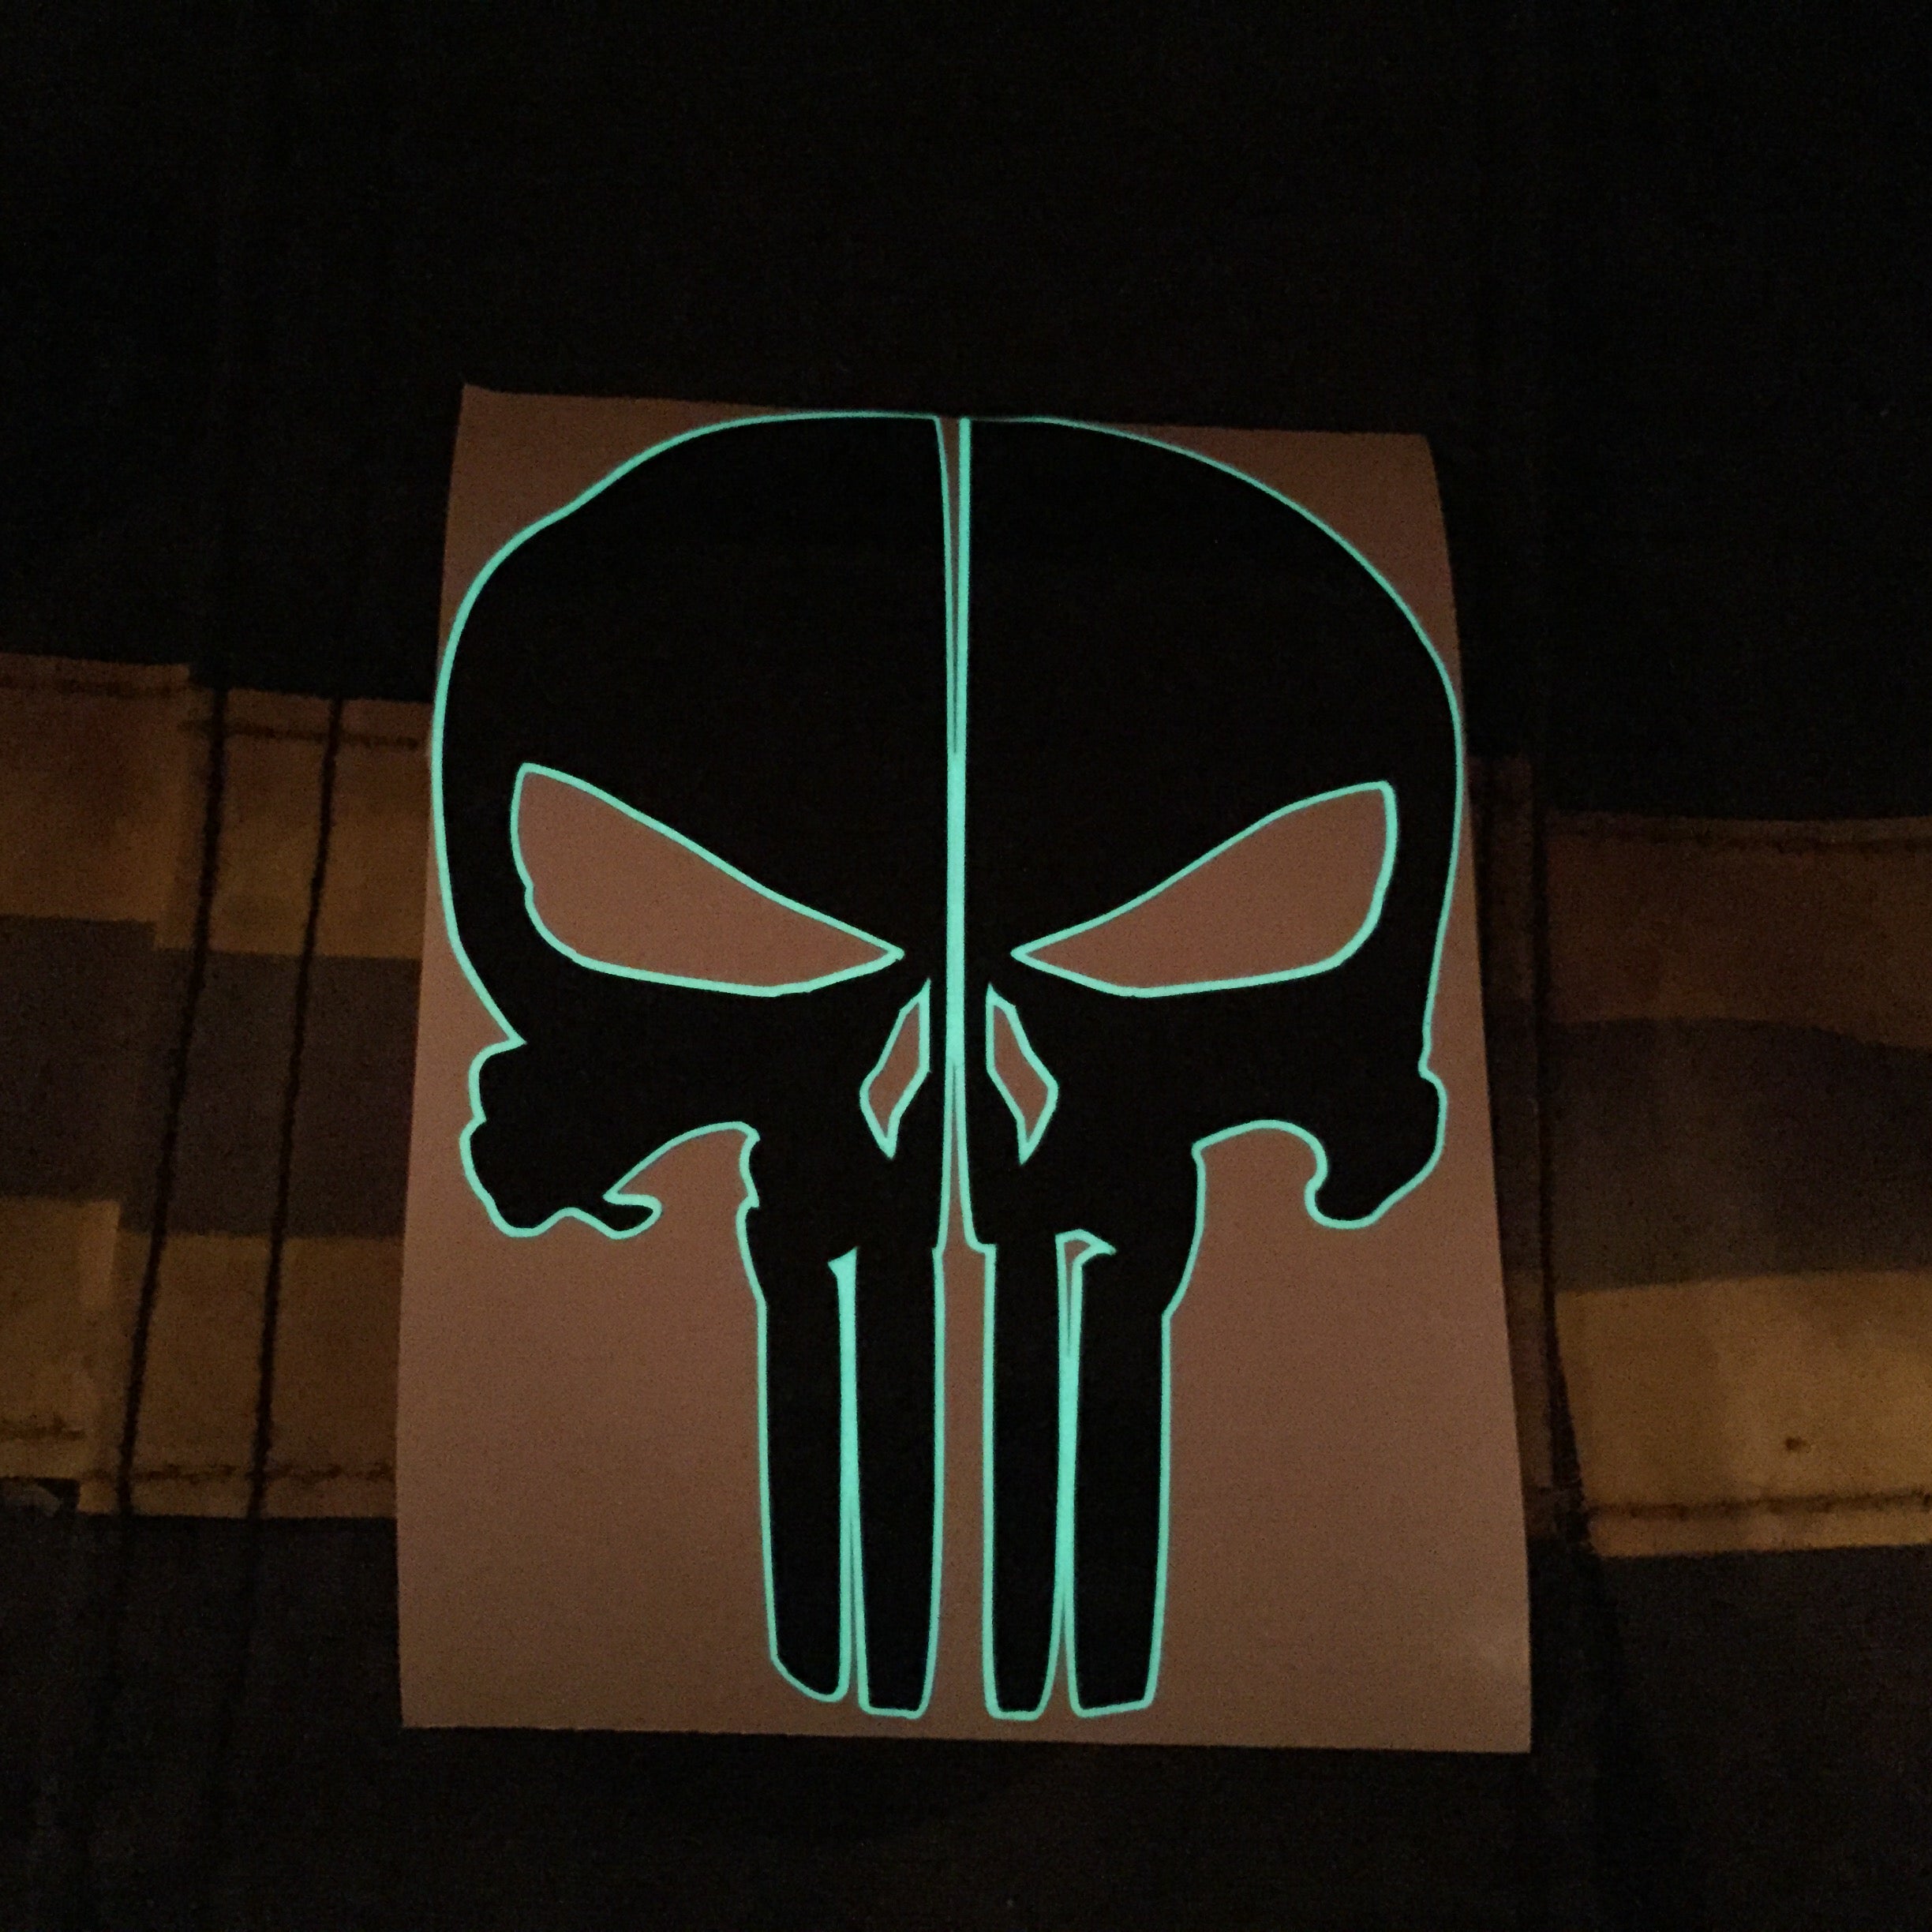 Punisher Skull Reflective Rear Helmet Decal Police Fire EMS Viny  Graphics/Stickers/Decals – dkedecals